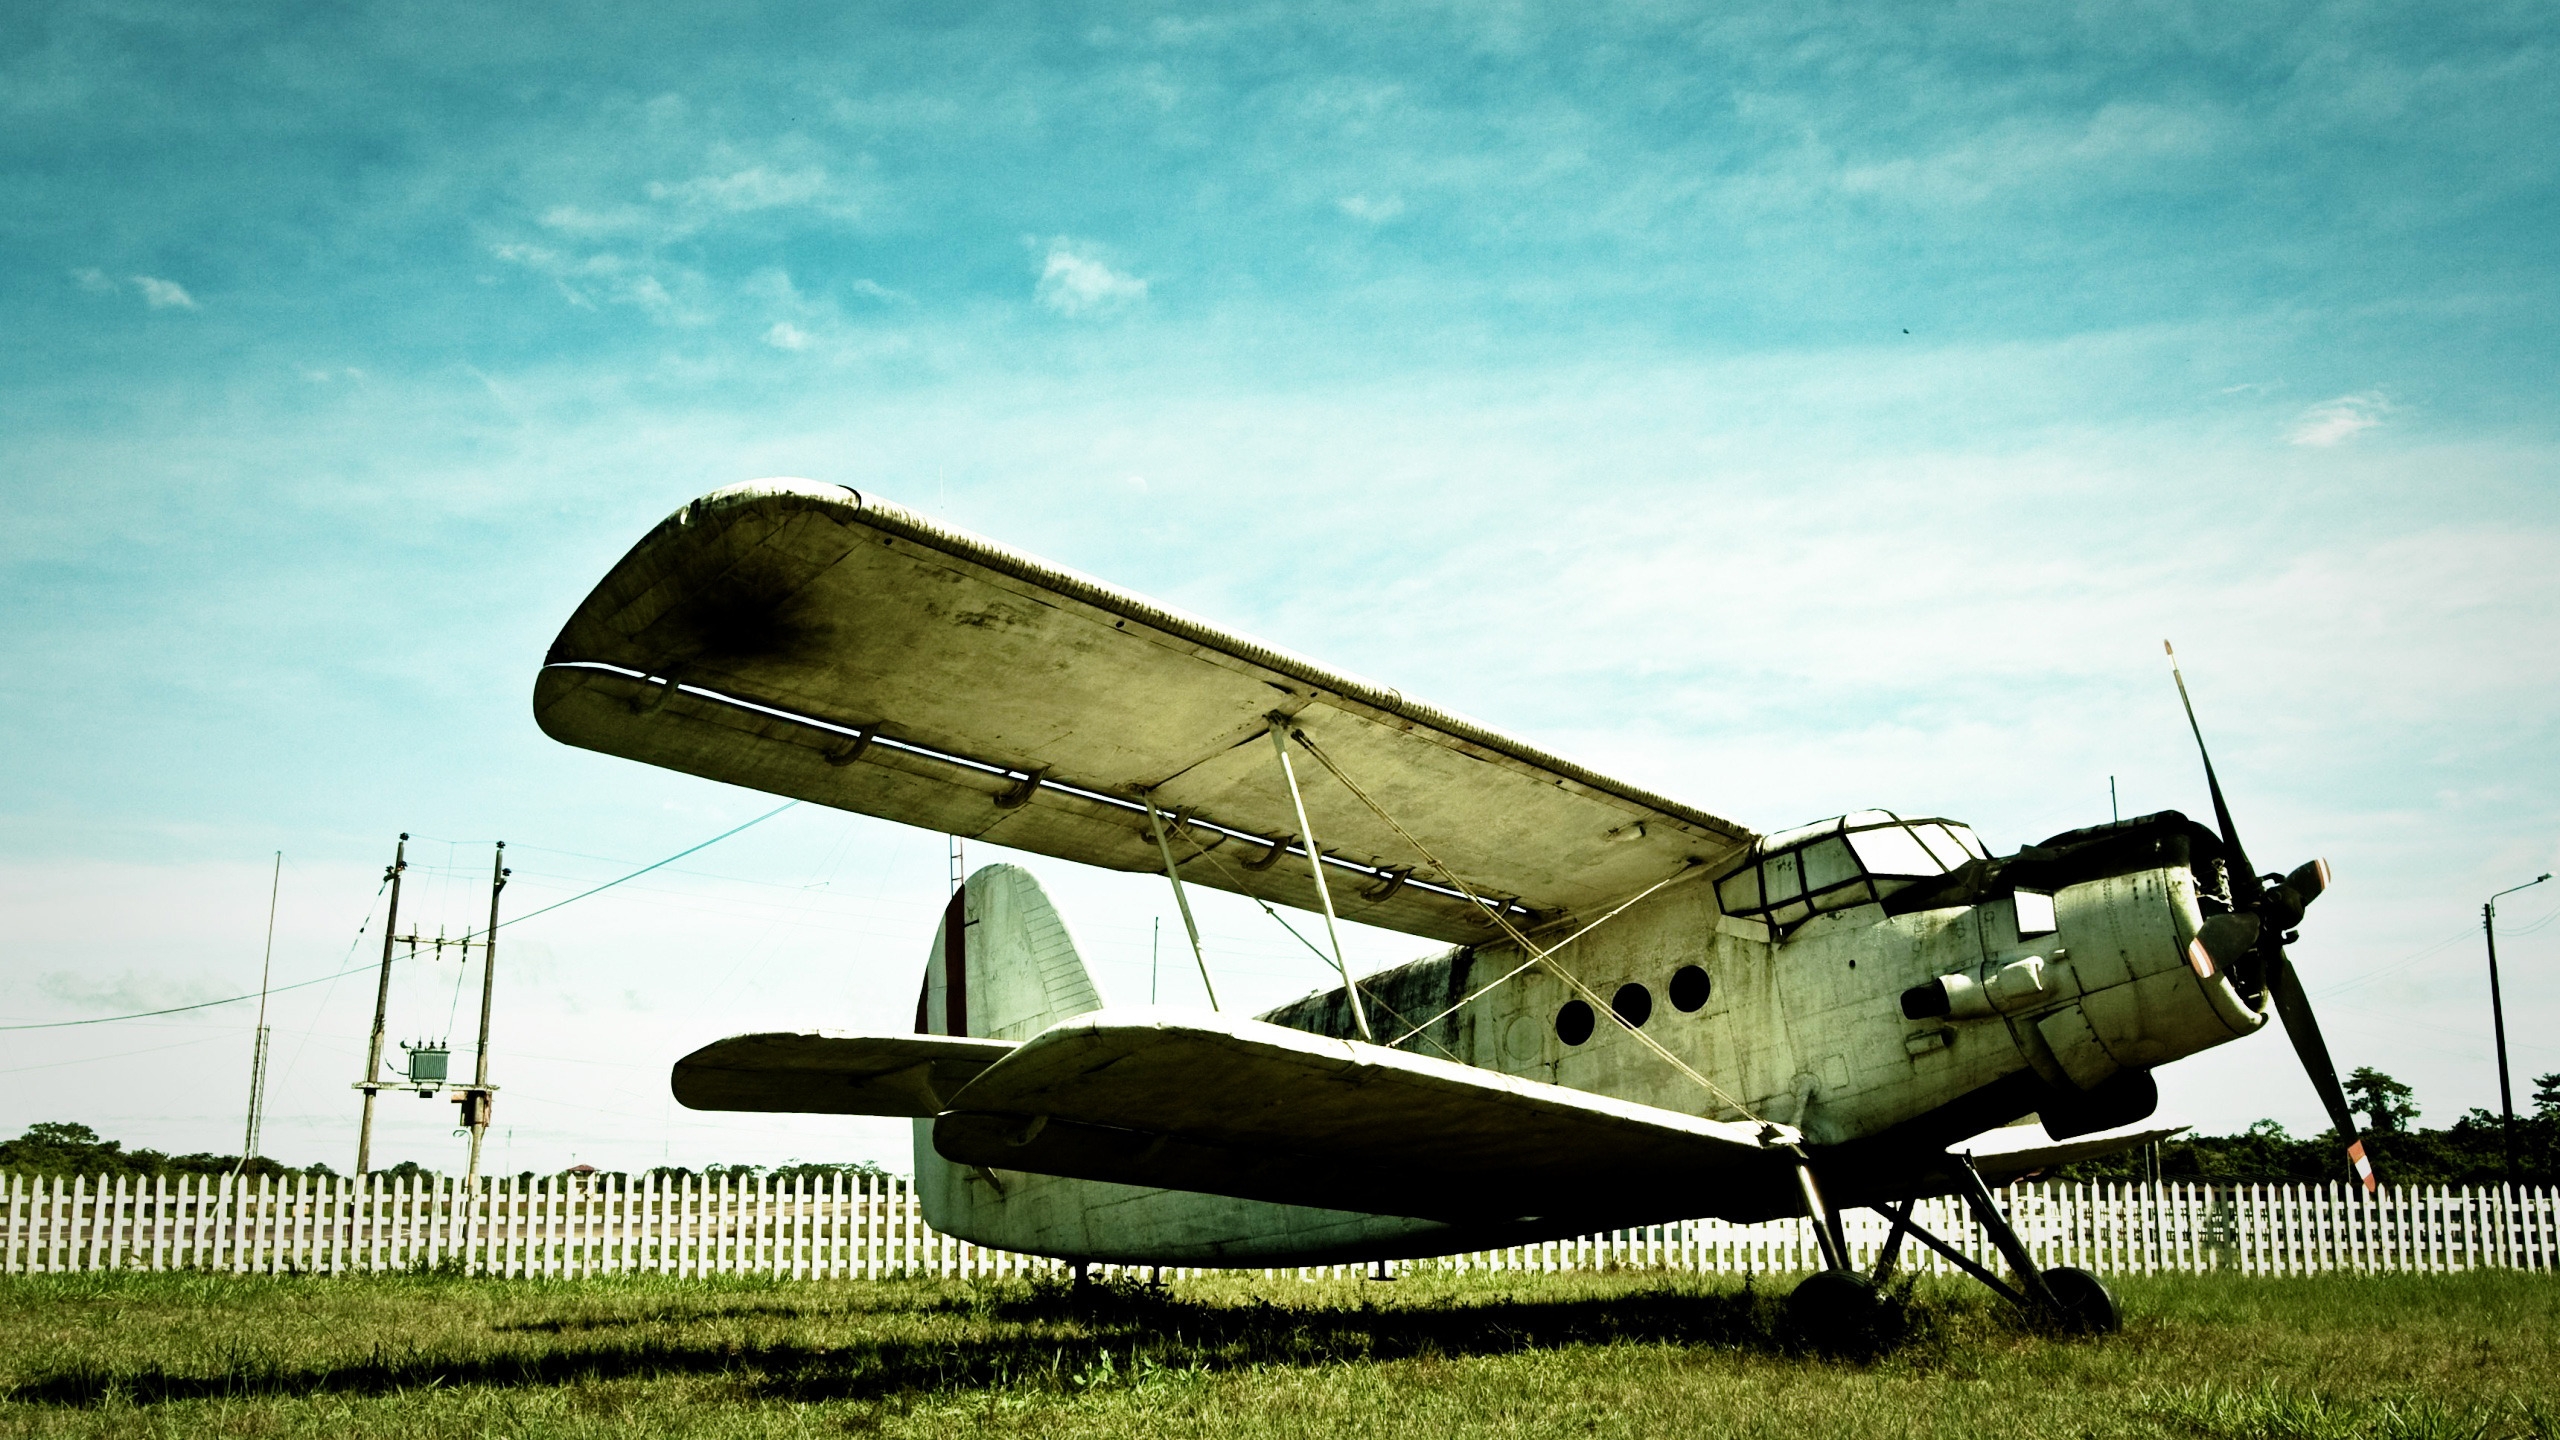 Old Airplane for 2560x1440 HDTV resolution